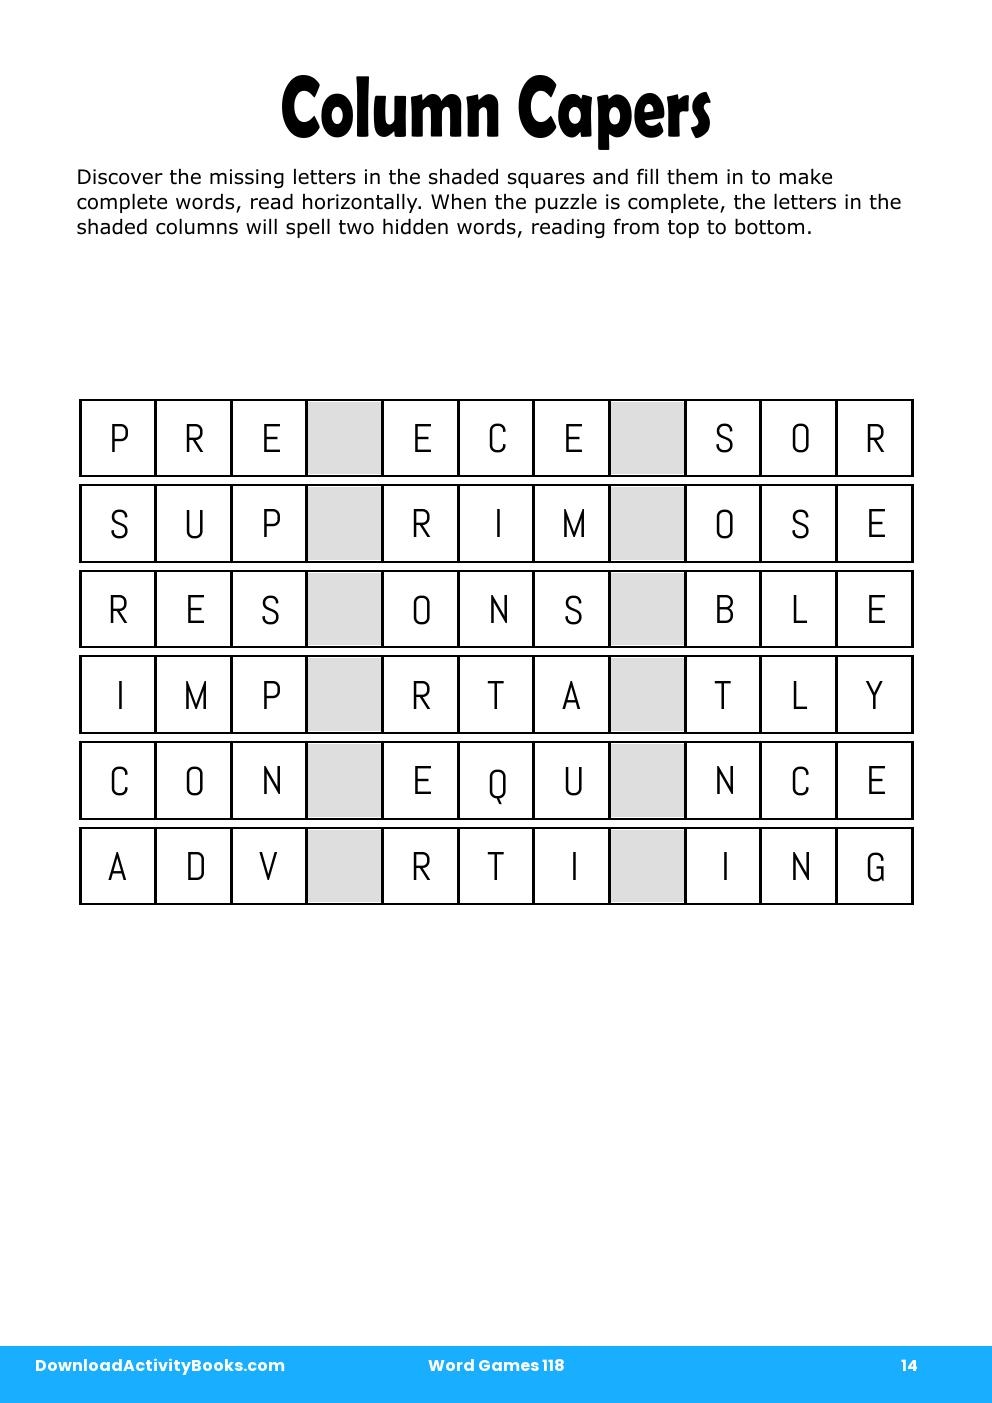 Column Capers in Word Games 118